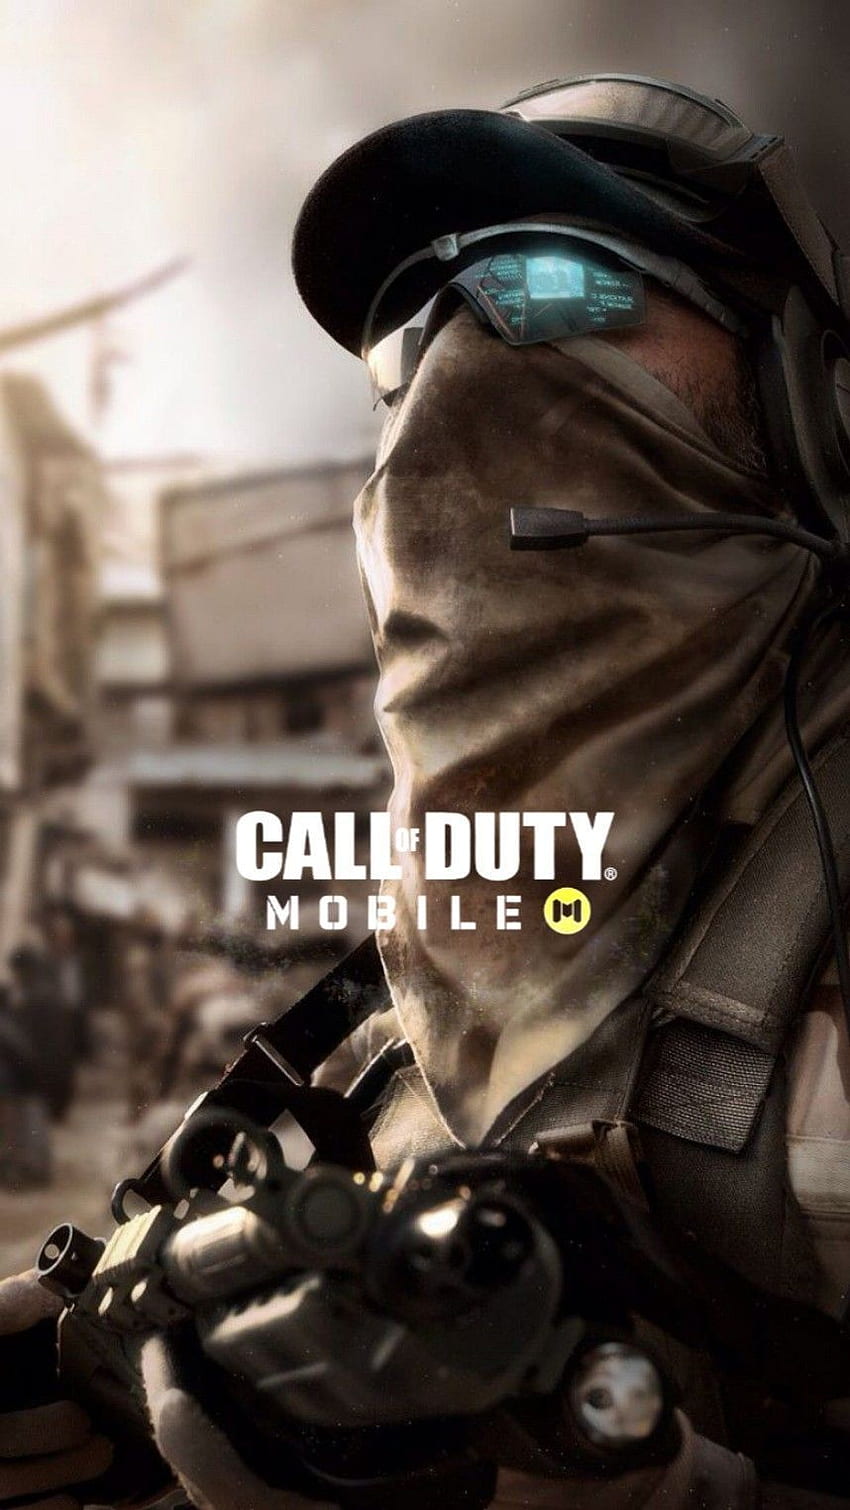 Call Of Duty Mobile. Call of duty, Cod game, Mobile logo HD phone wallpaper